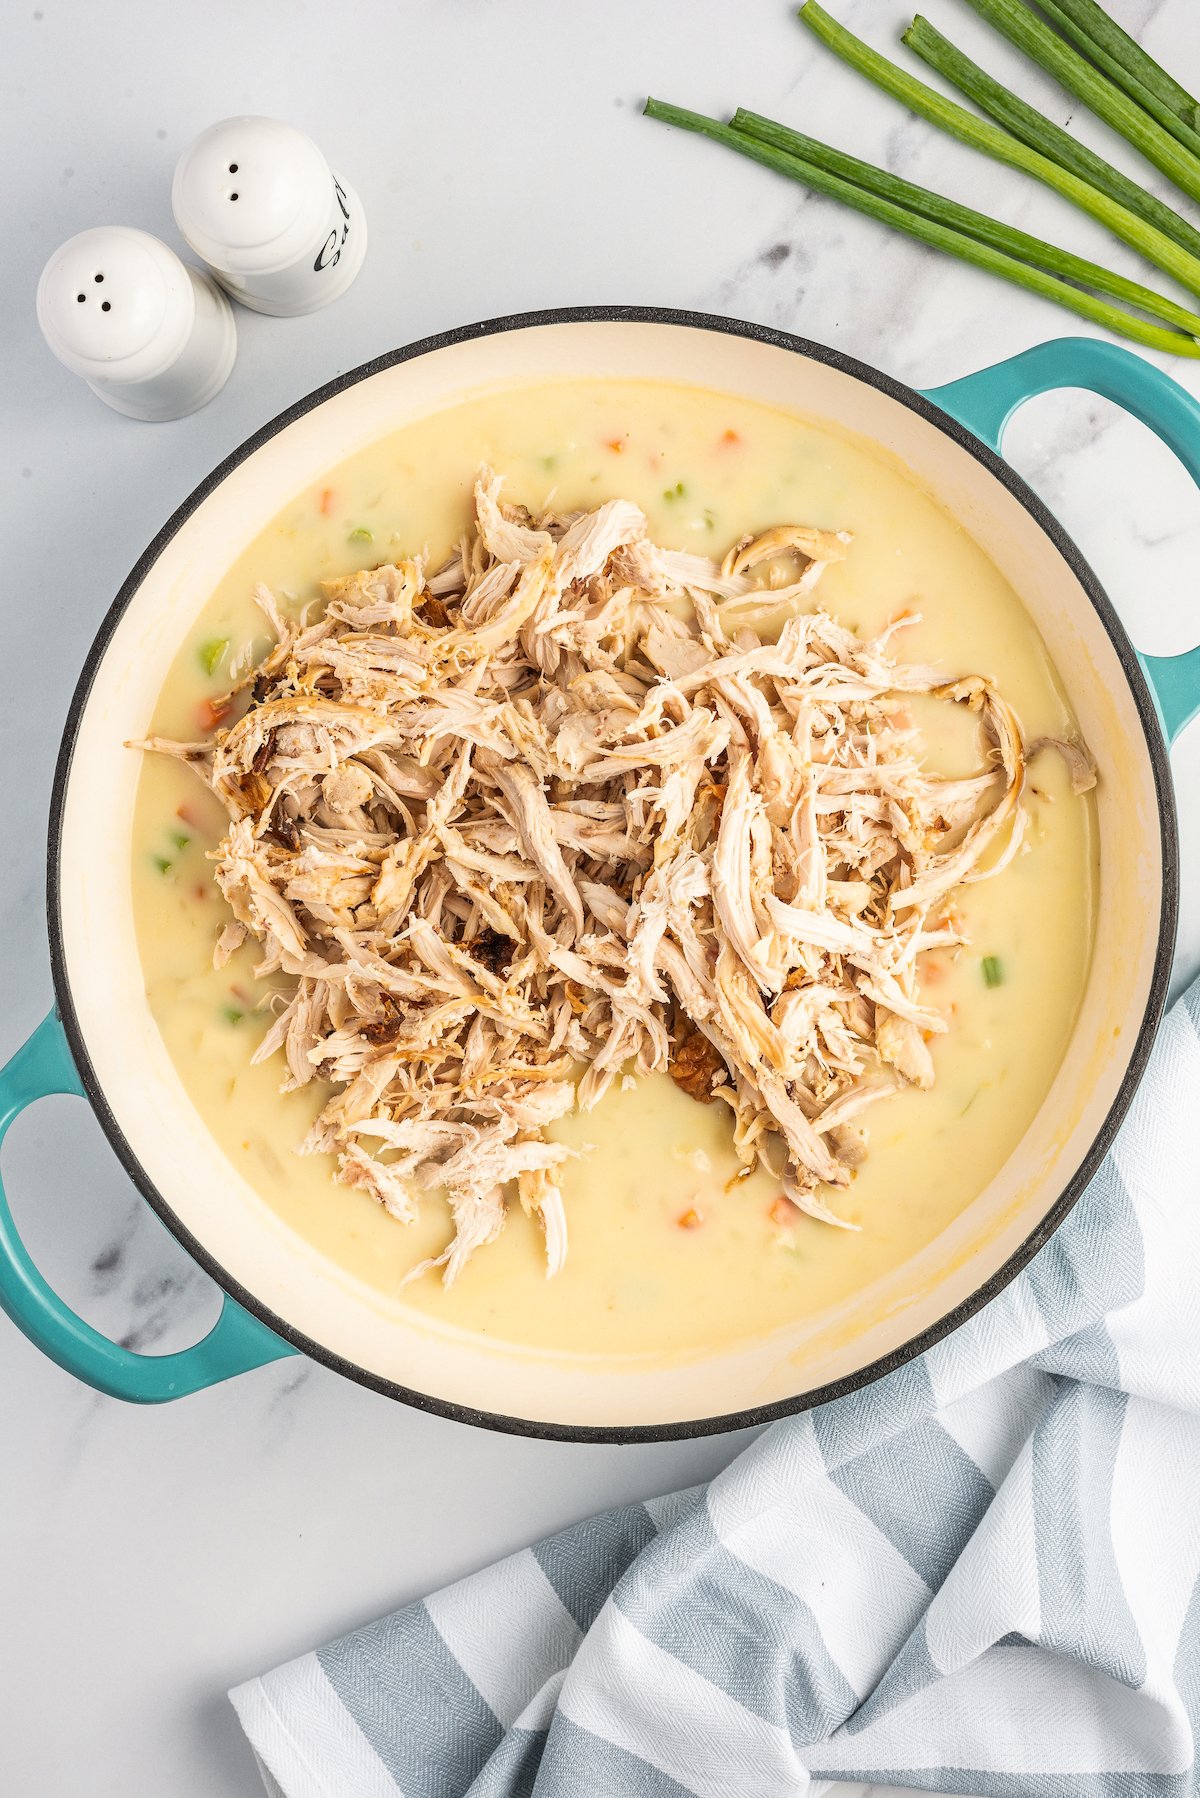 Shredded chicken added to a creamy sauce.